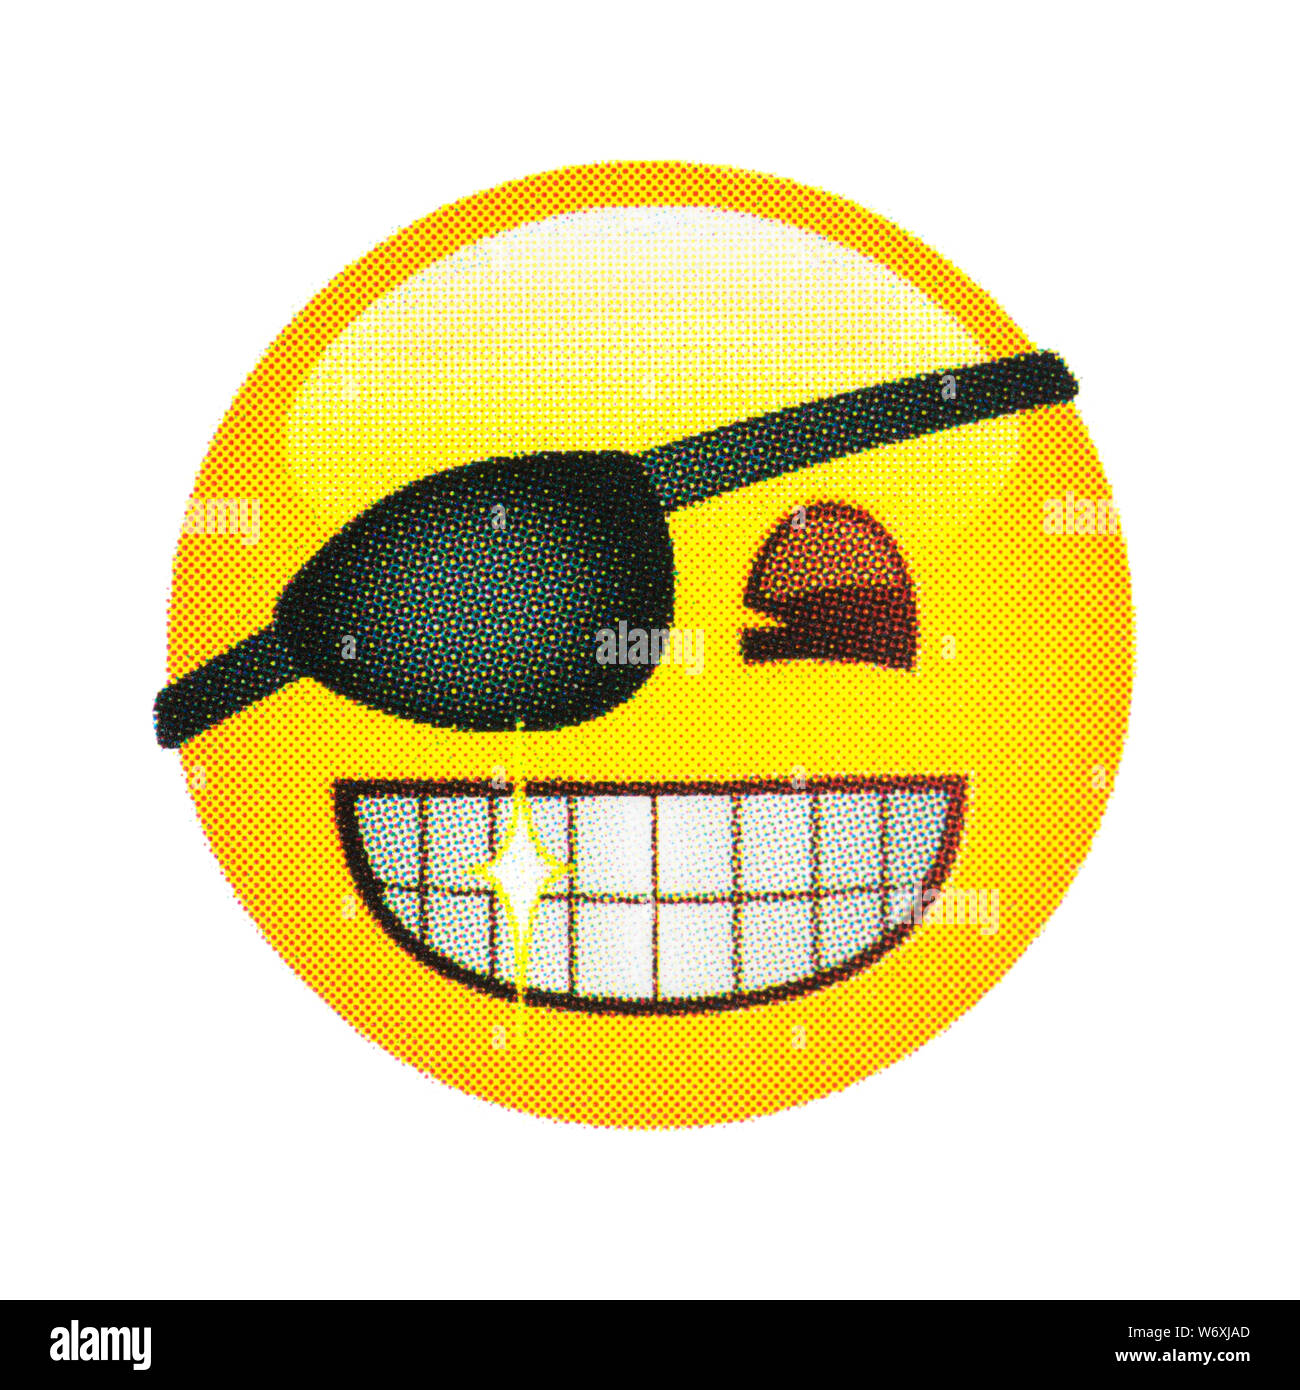 Grinning face with eye patch emoticon Stock Photo